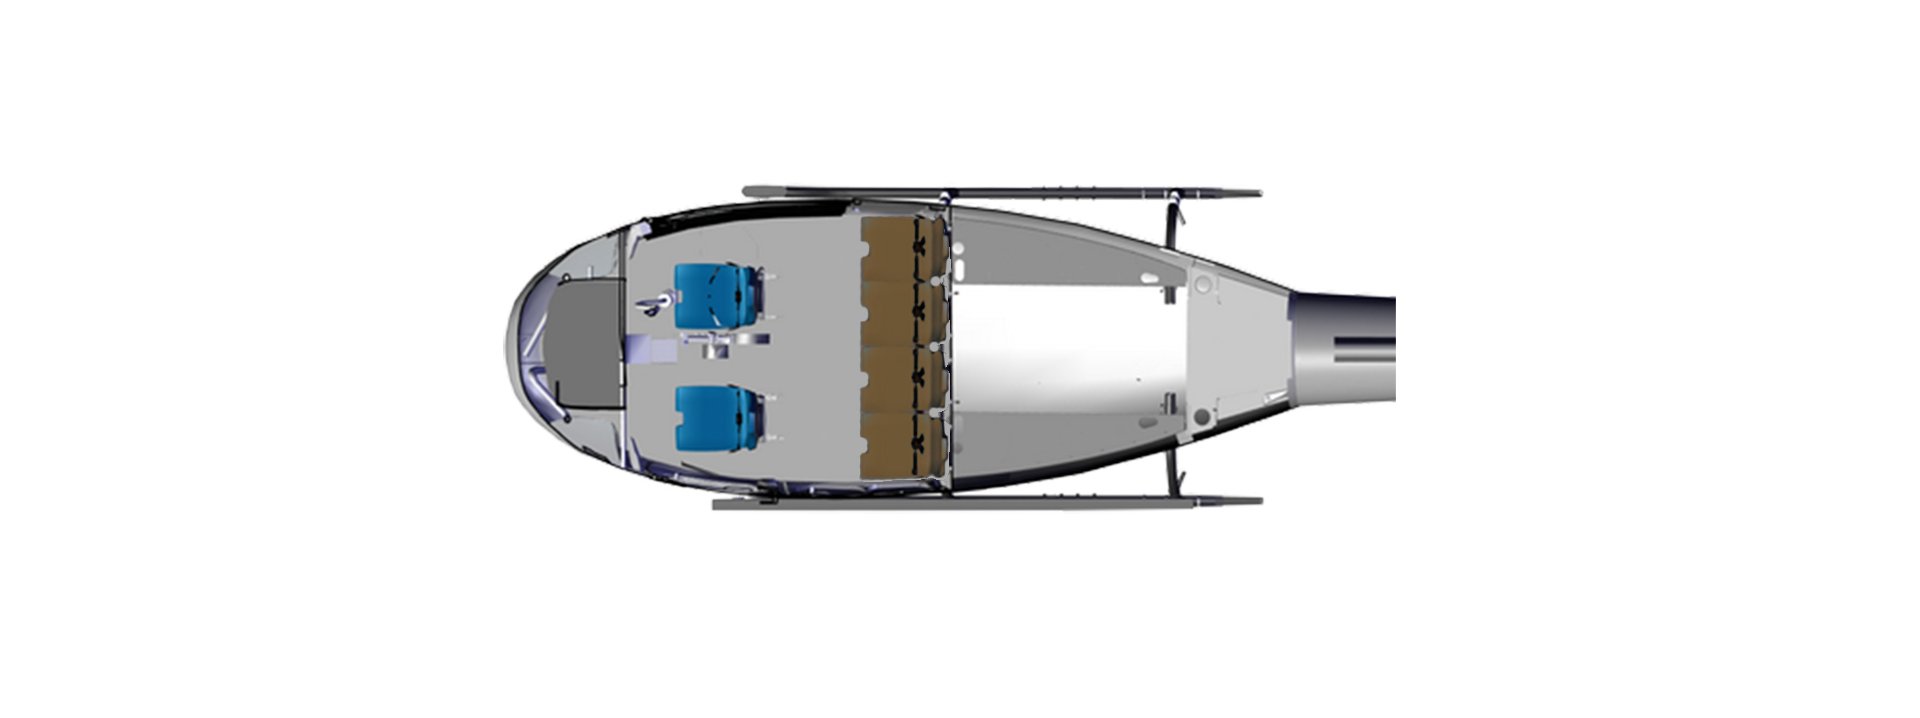 An Airbus H125 helicopter cabin configuration with one pilot and five passengers